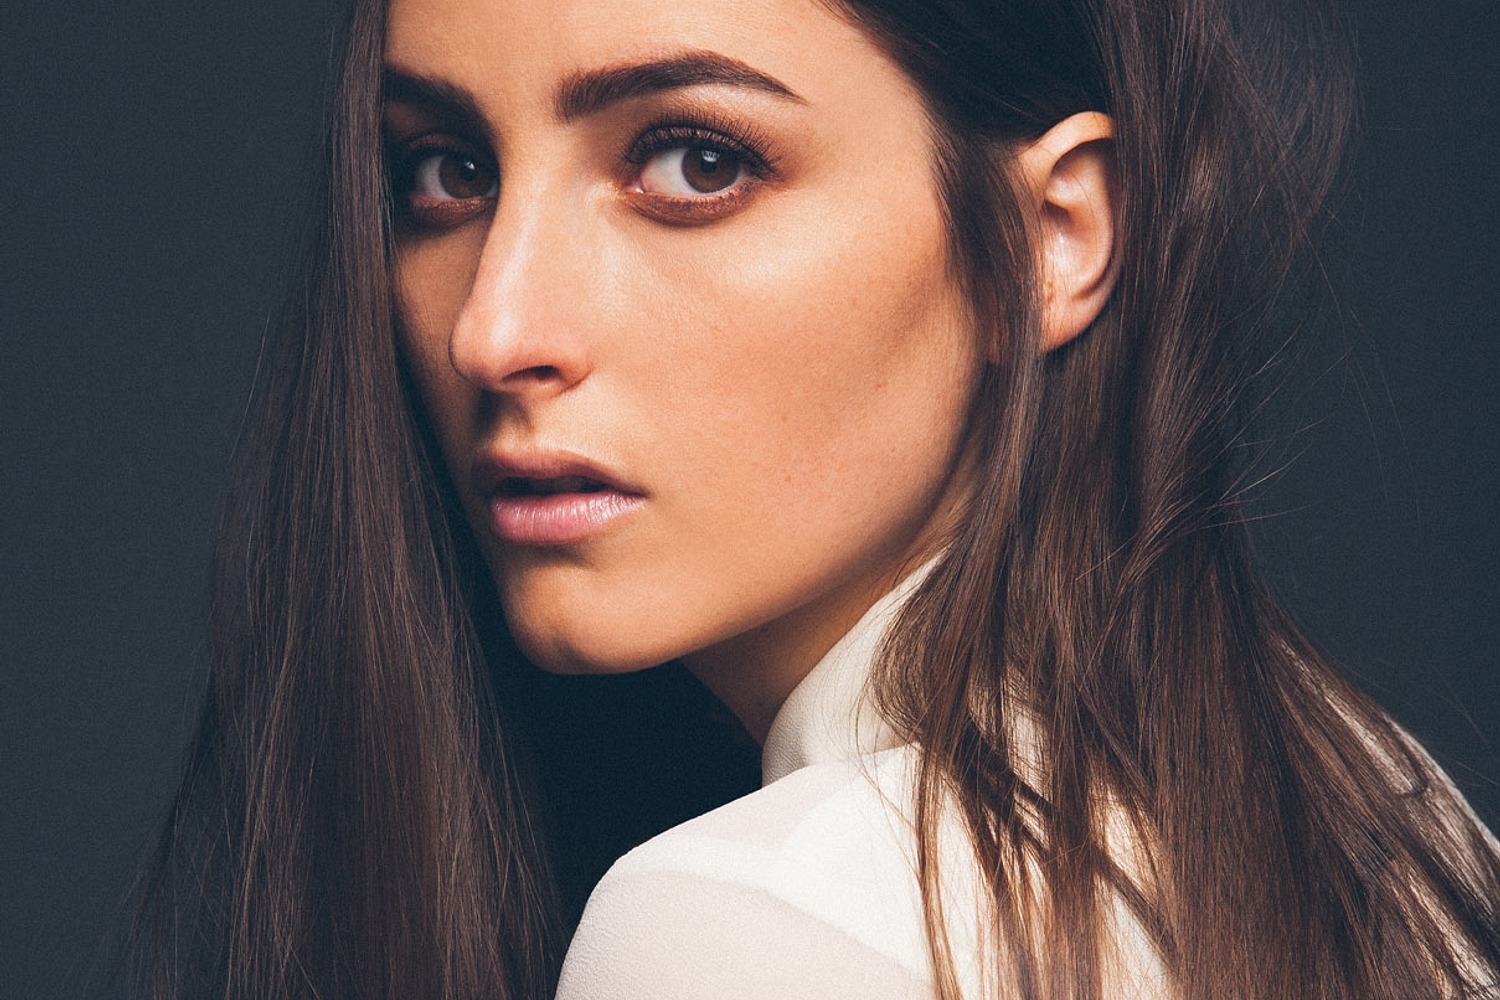 BANKS streams new track ‘Beggin For Thread’